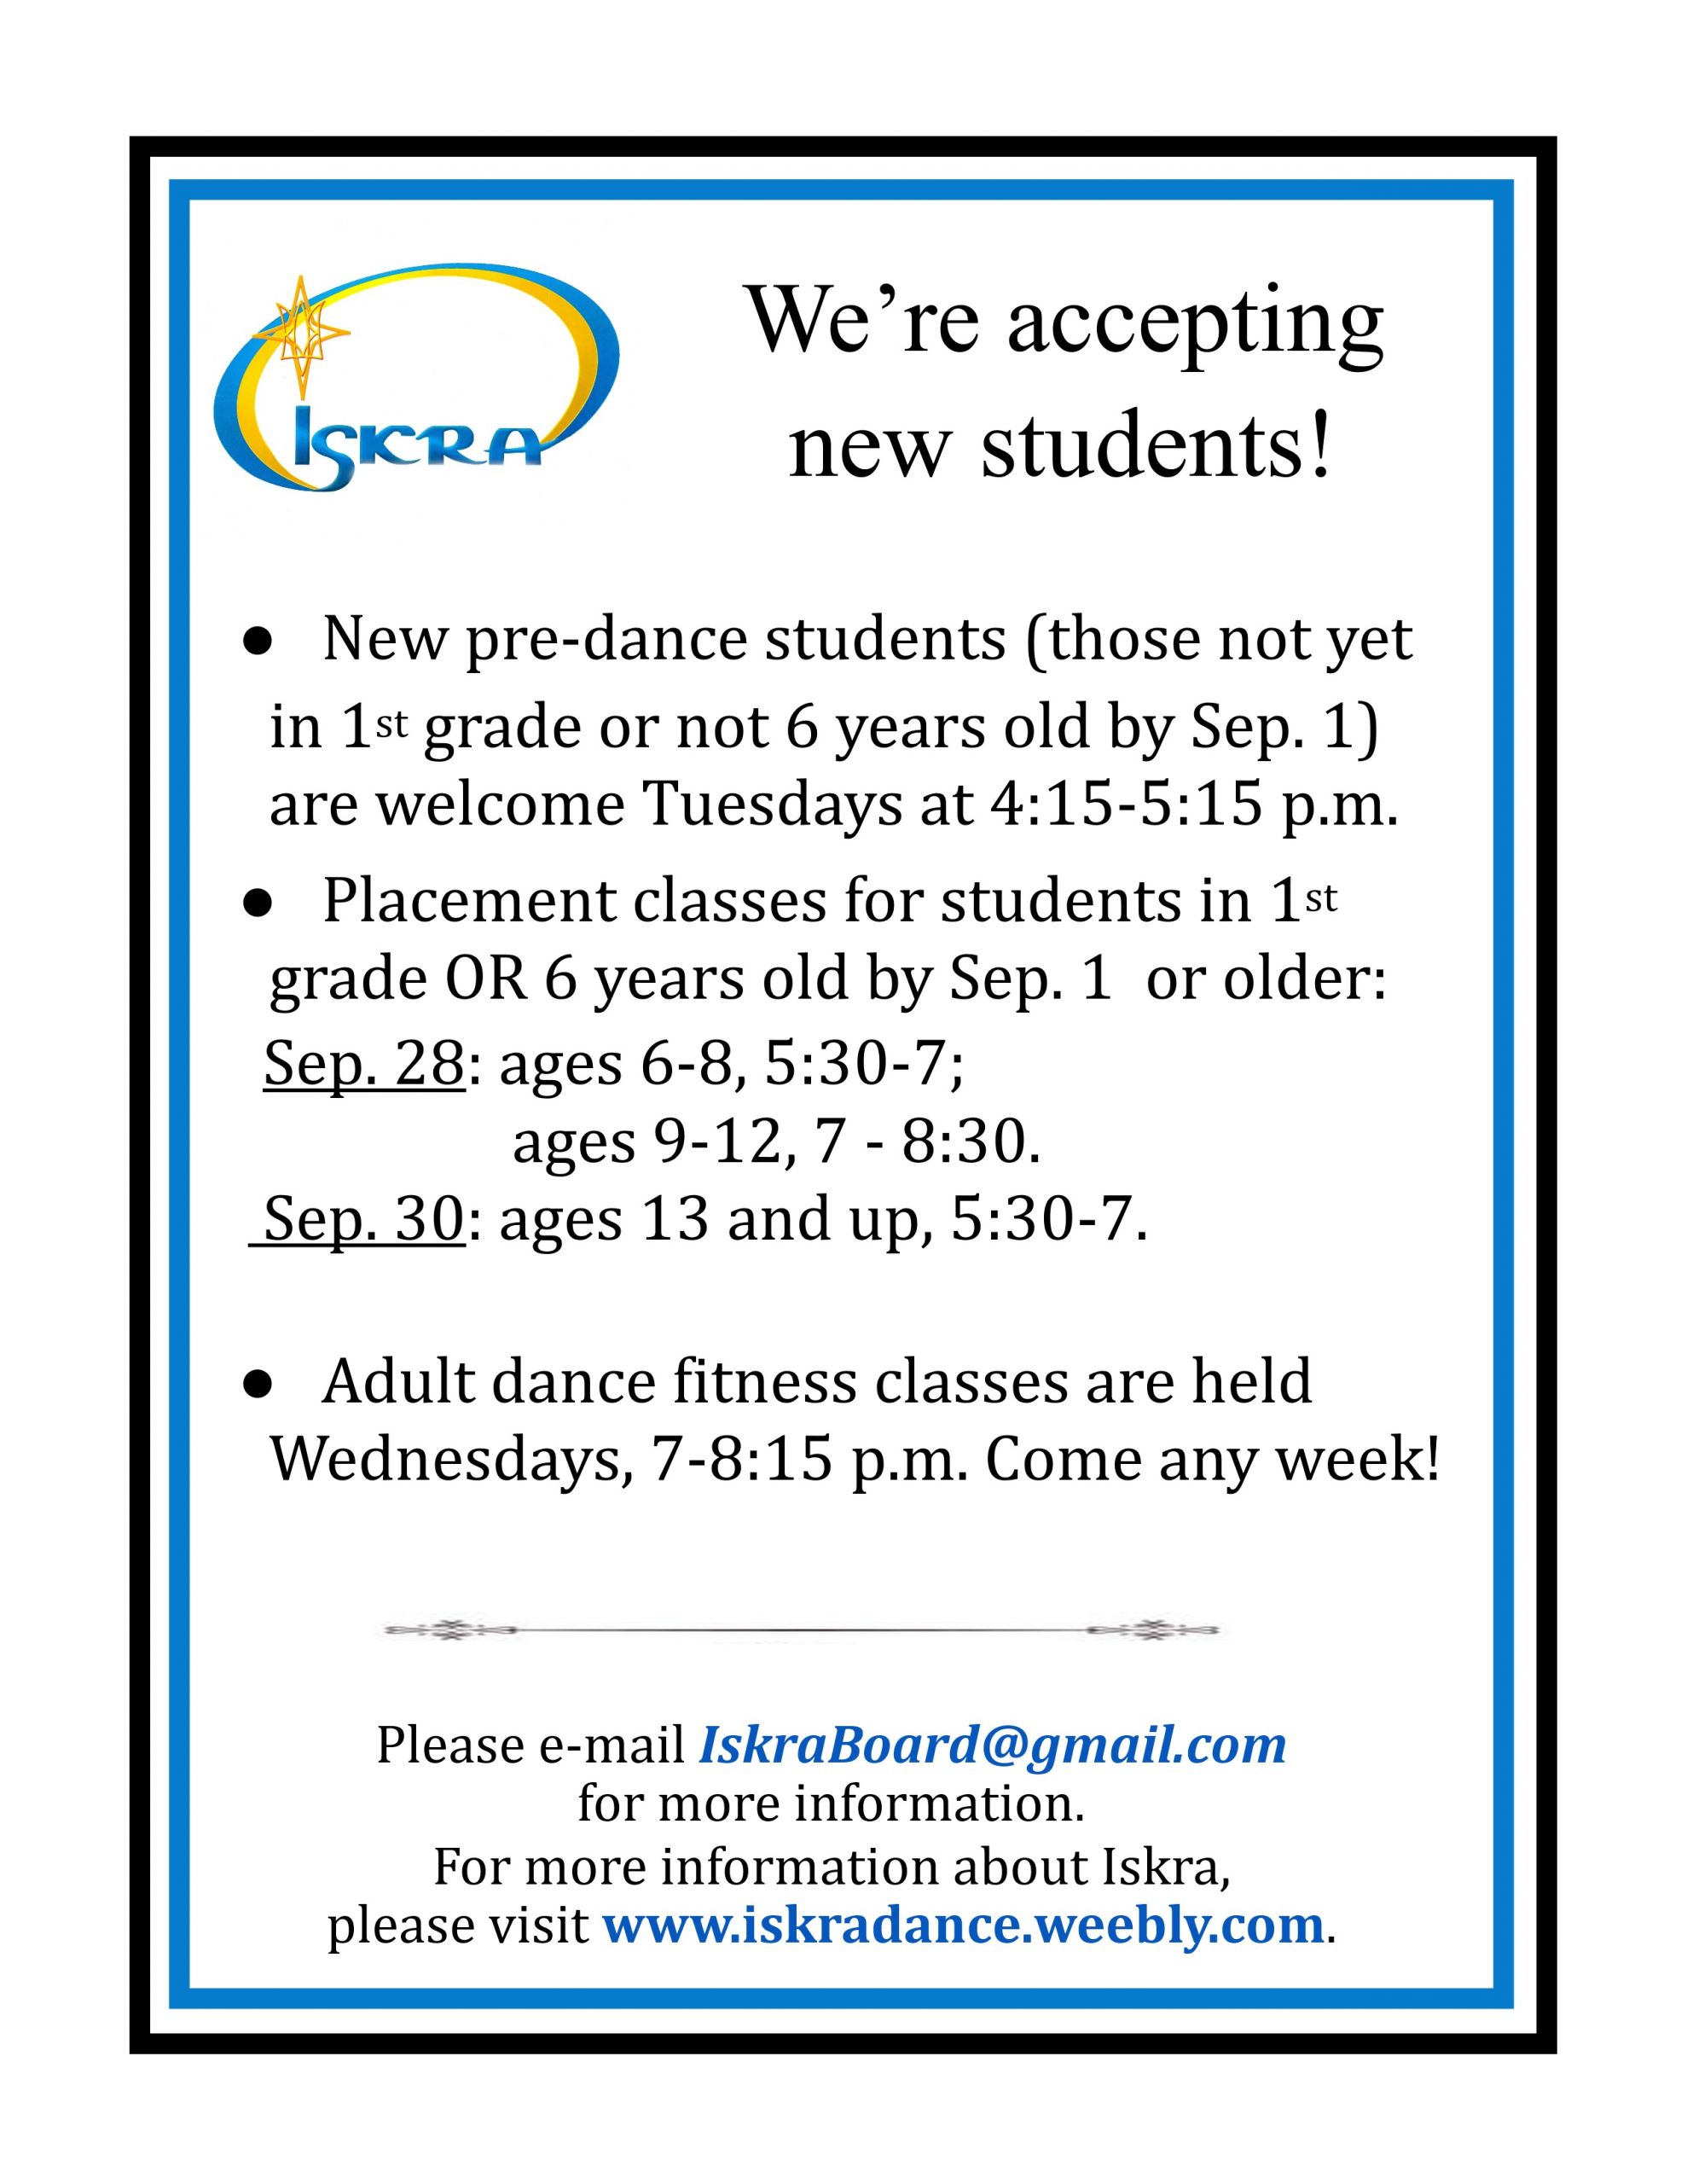 Iskra, We’re accepting new students!